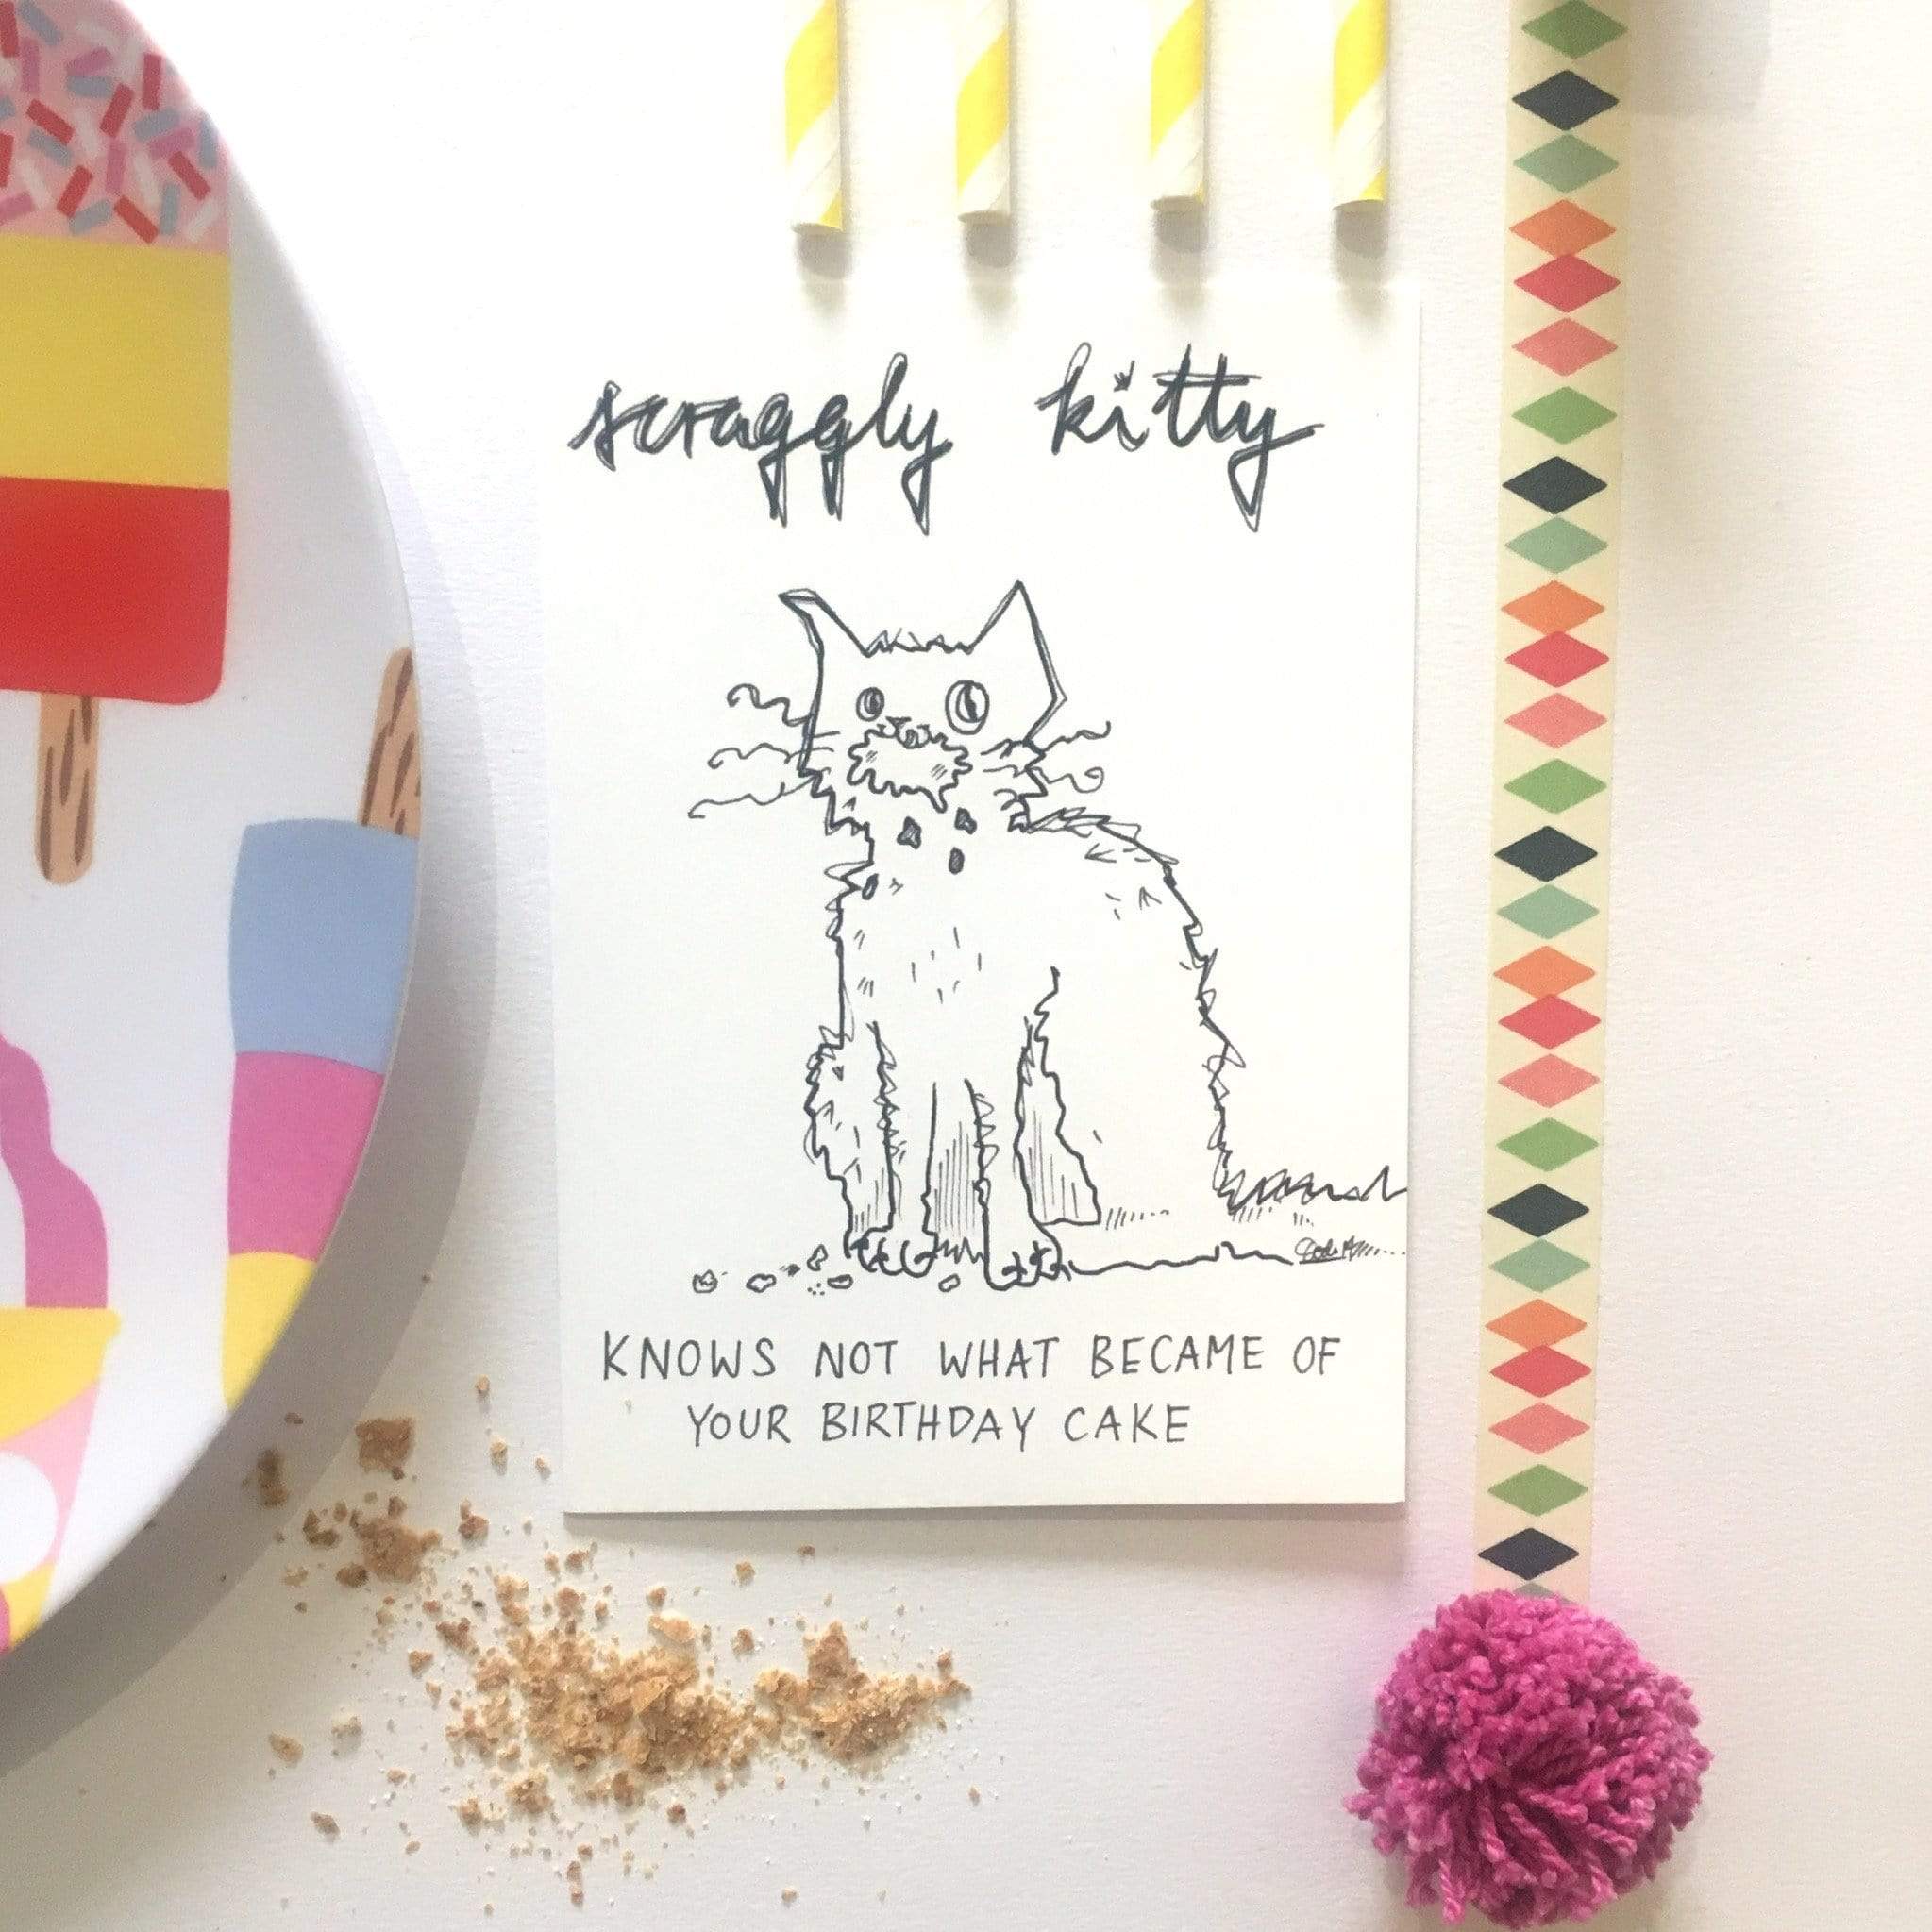 Scraggly Kitty Knows Not What Became Of Your Birthday Cake Greeting Card